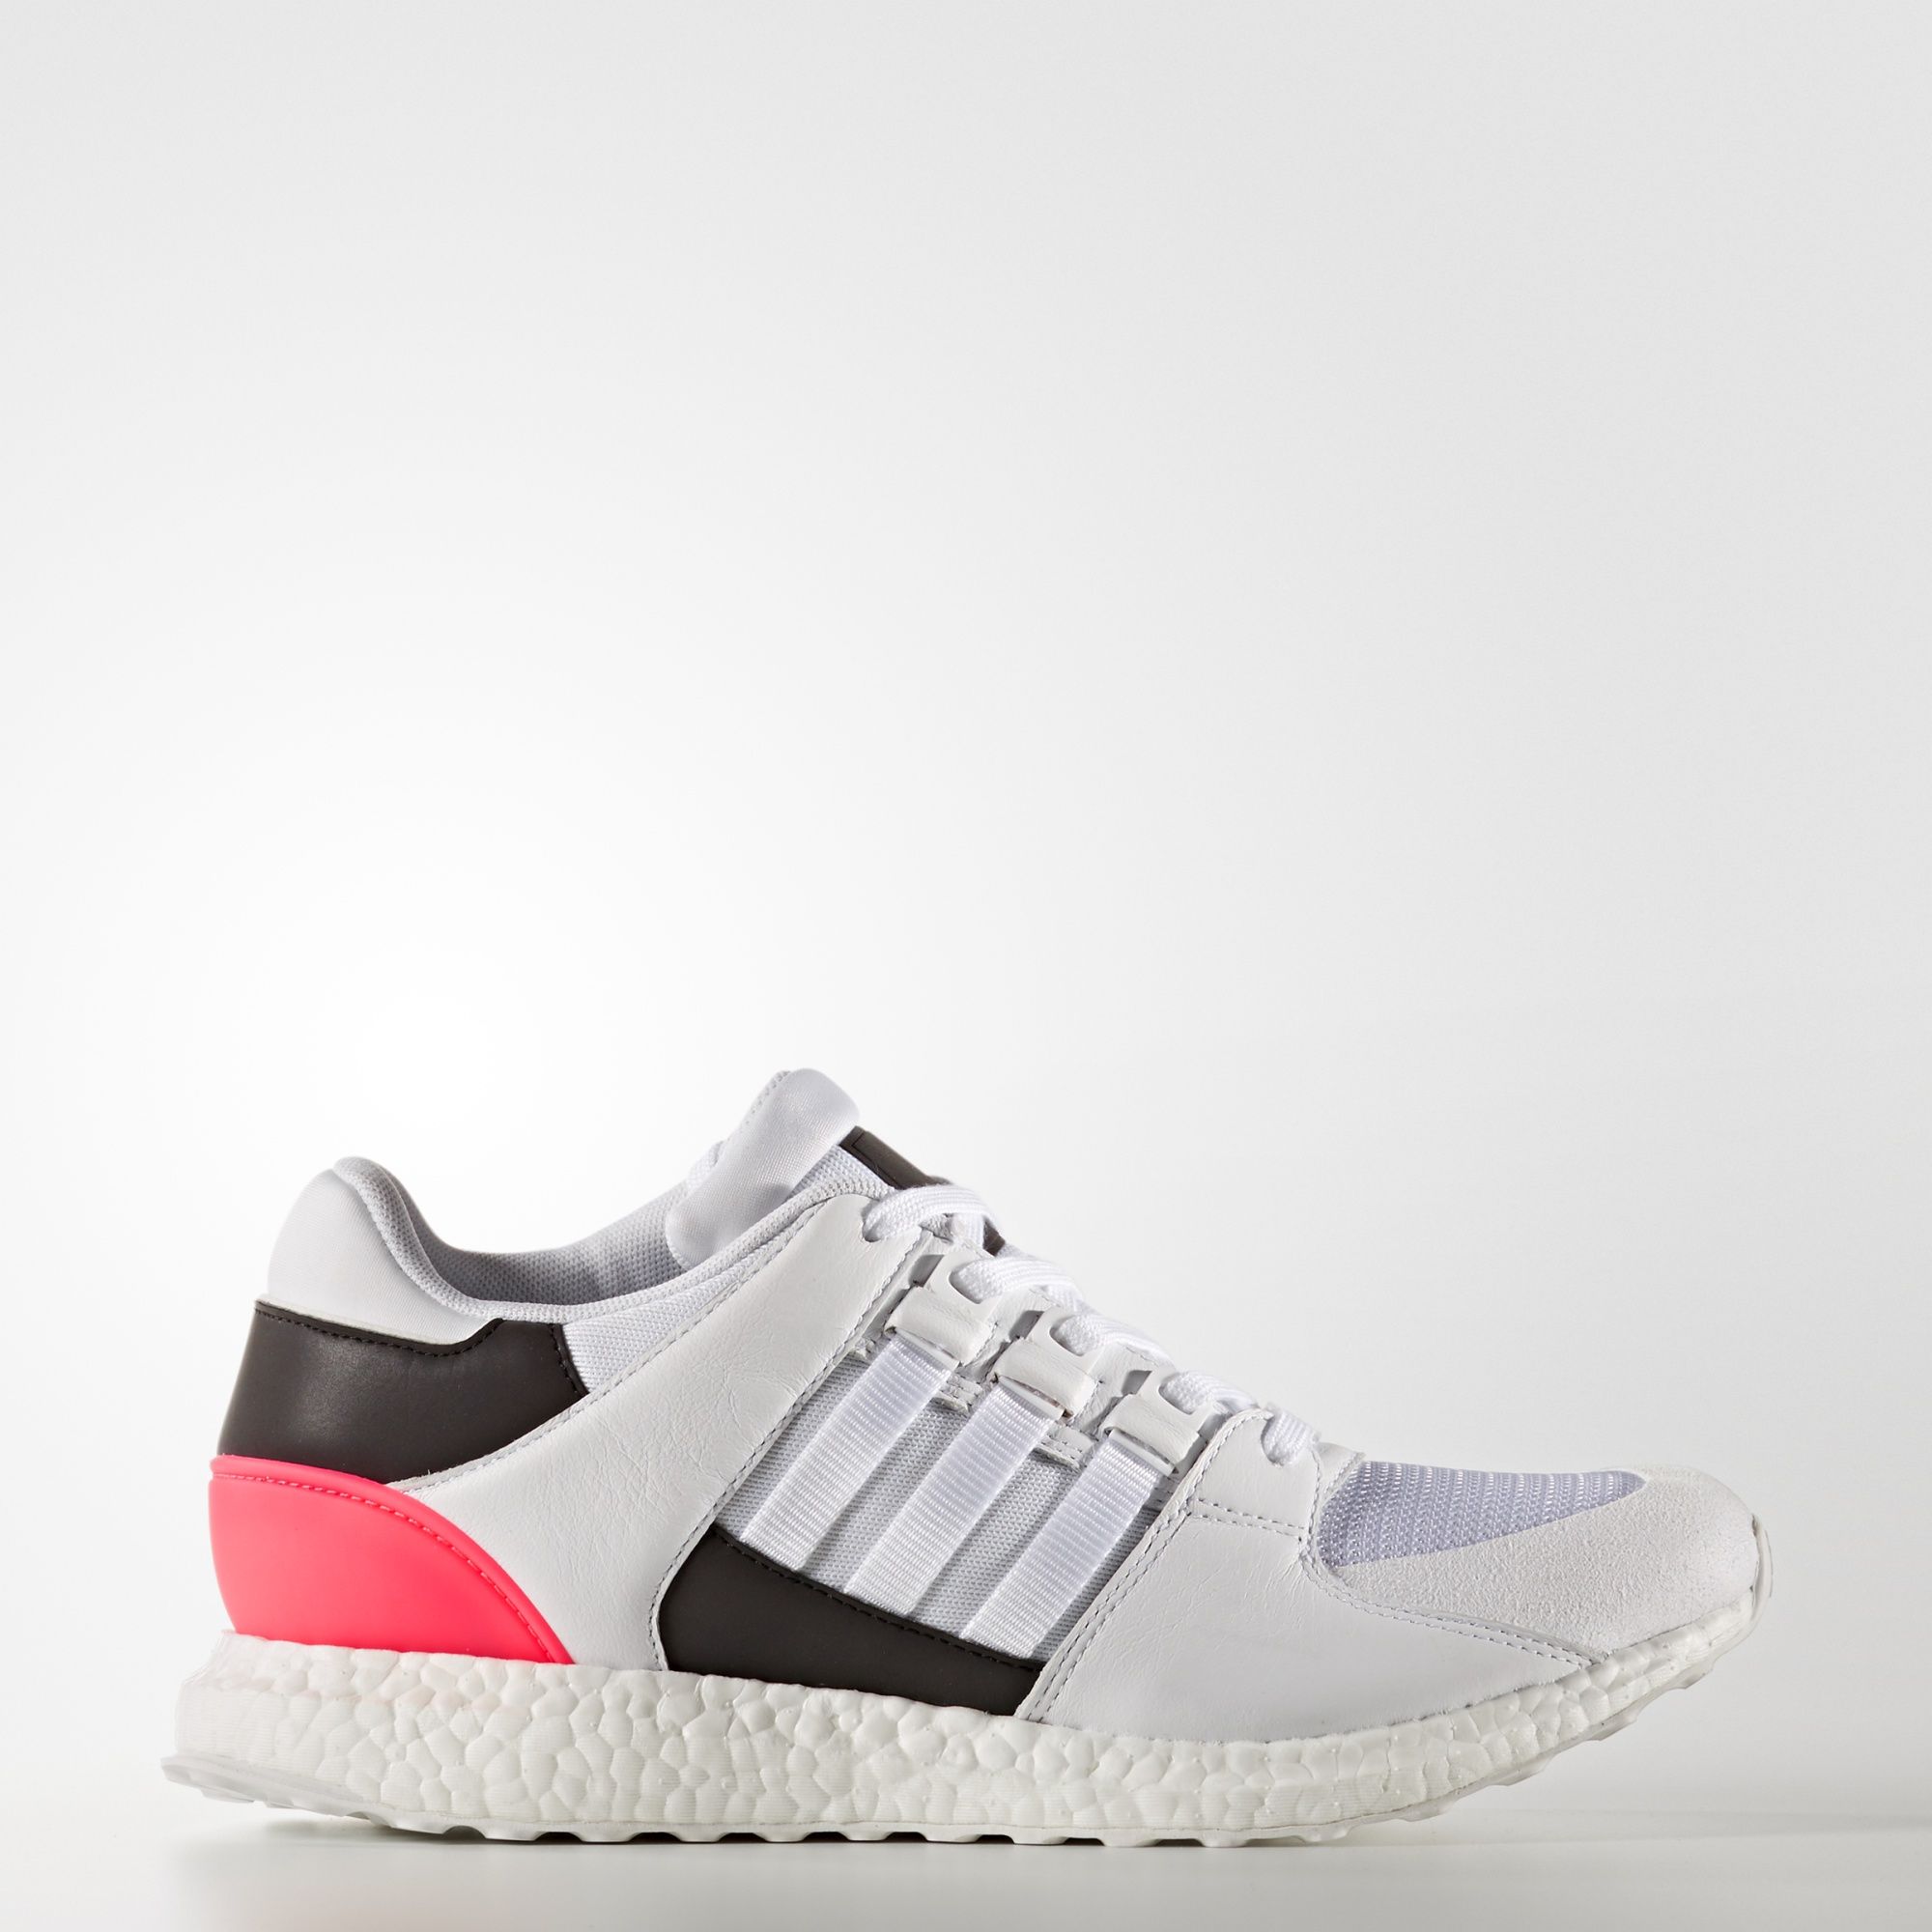 adidas-eqt-support-ultra-boost-white-turbo-red-2